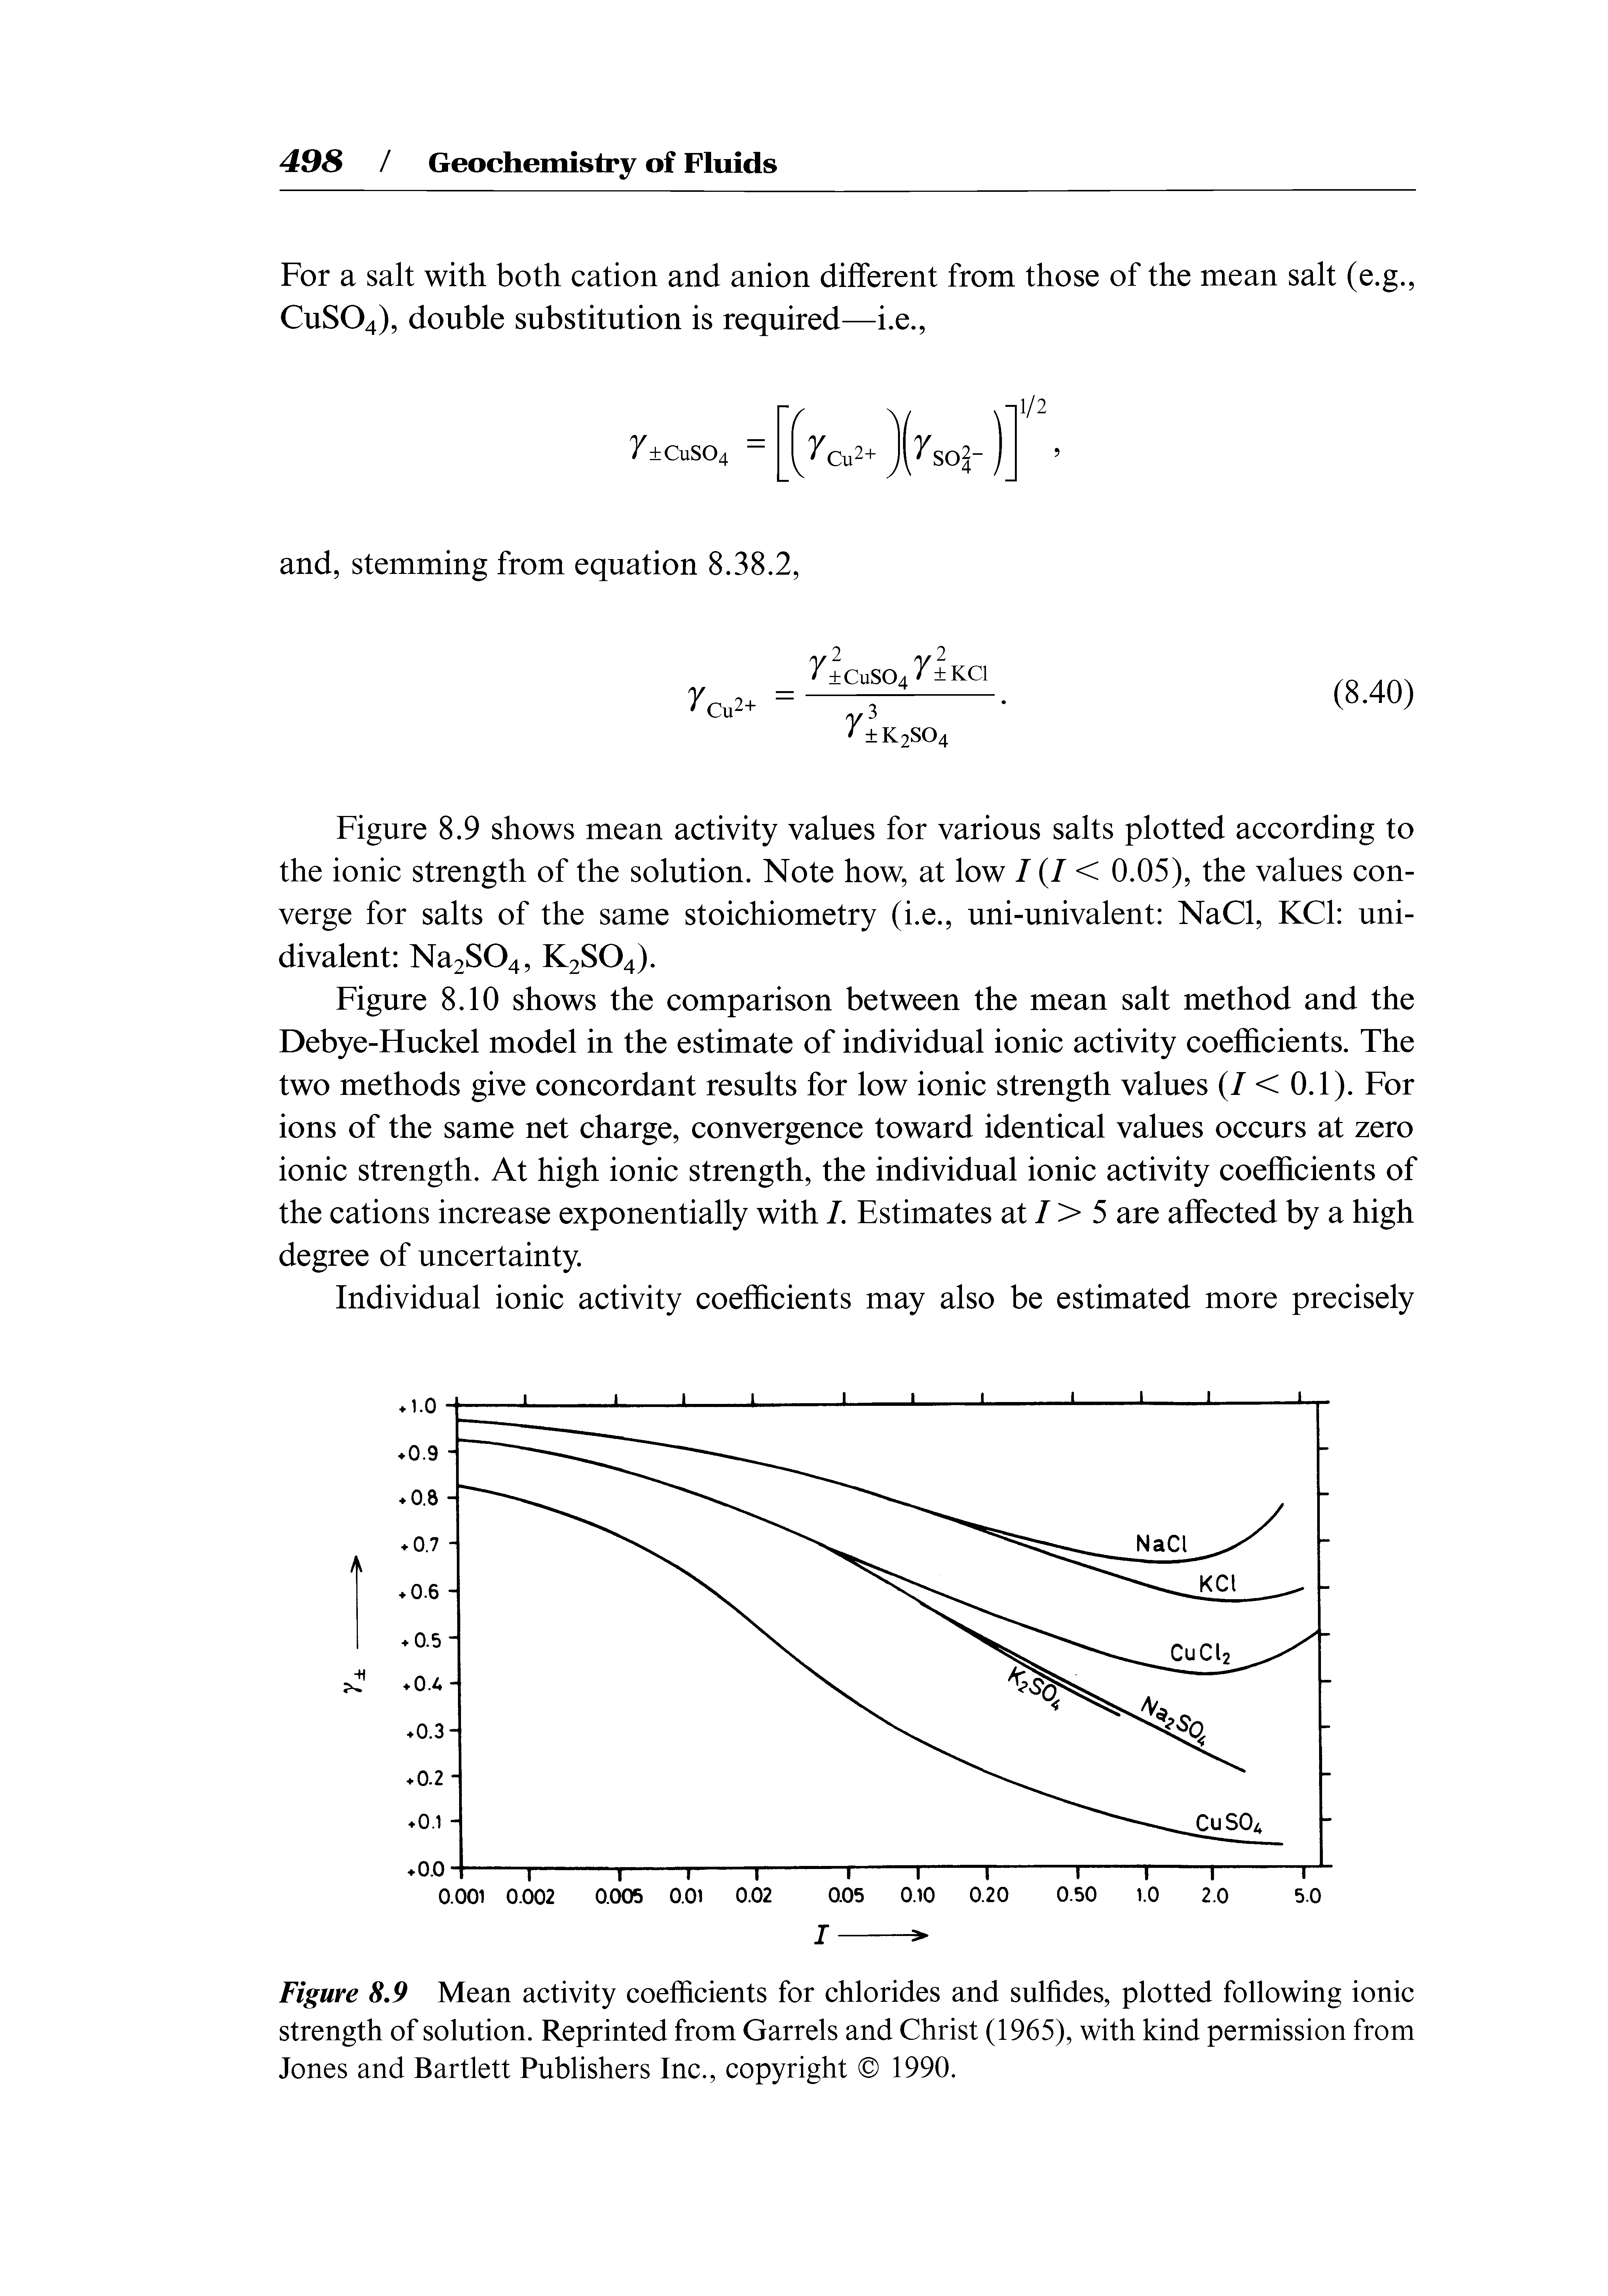 Figure 8.9 Mean activity coefficients for chlorides and sulfides, plotted following ionic strength of solution. Reprinted from Garrels and Christ (1965), with kind permission from Jones and Bartlett Publishers Inc., copyright 1990.